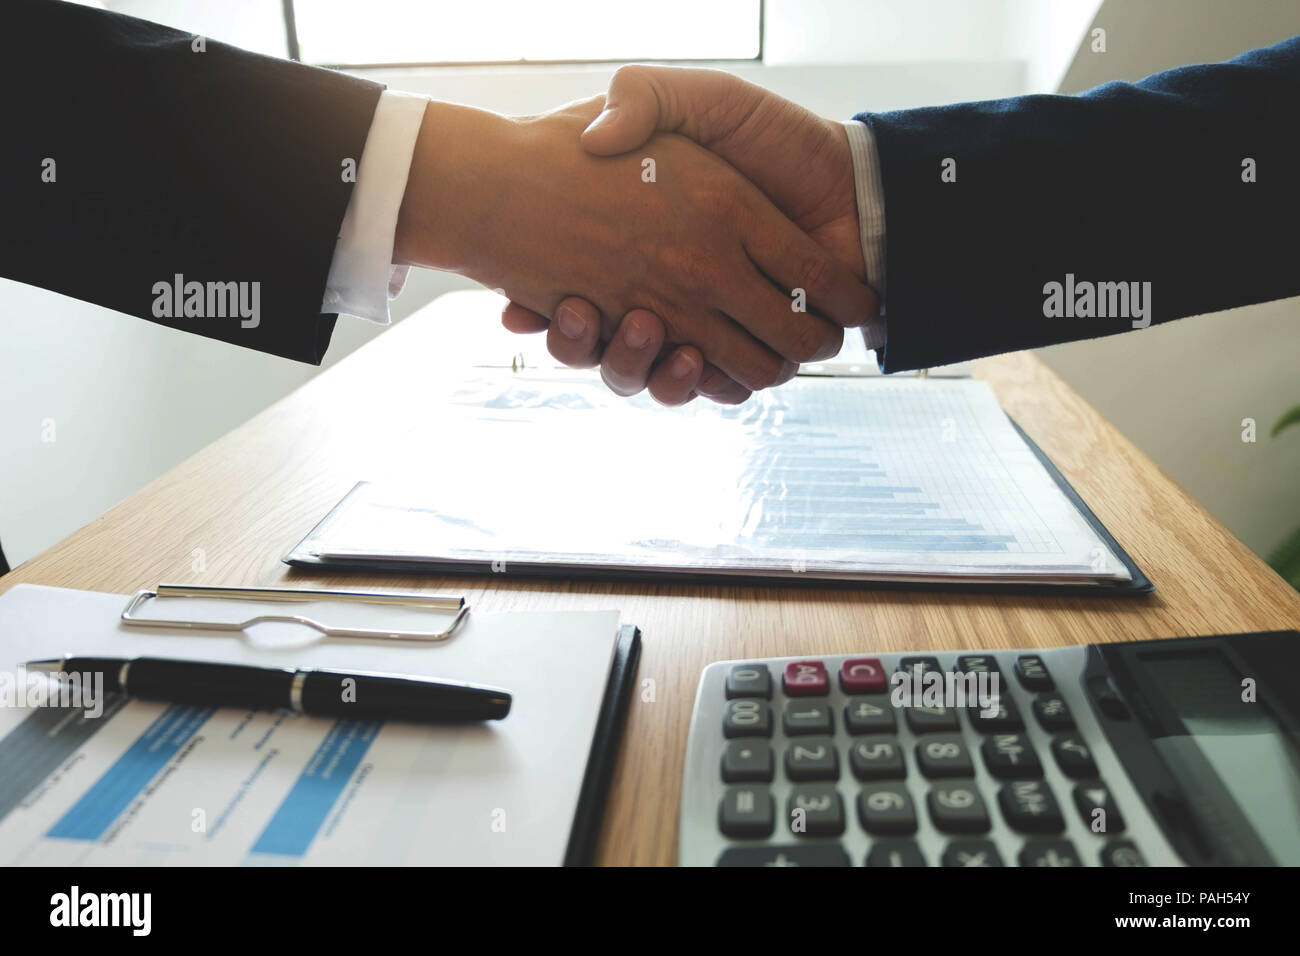 Business handshake. Business people shaking hands, finishing up a meeting,Success agreement negotiation. Stock Photo